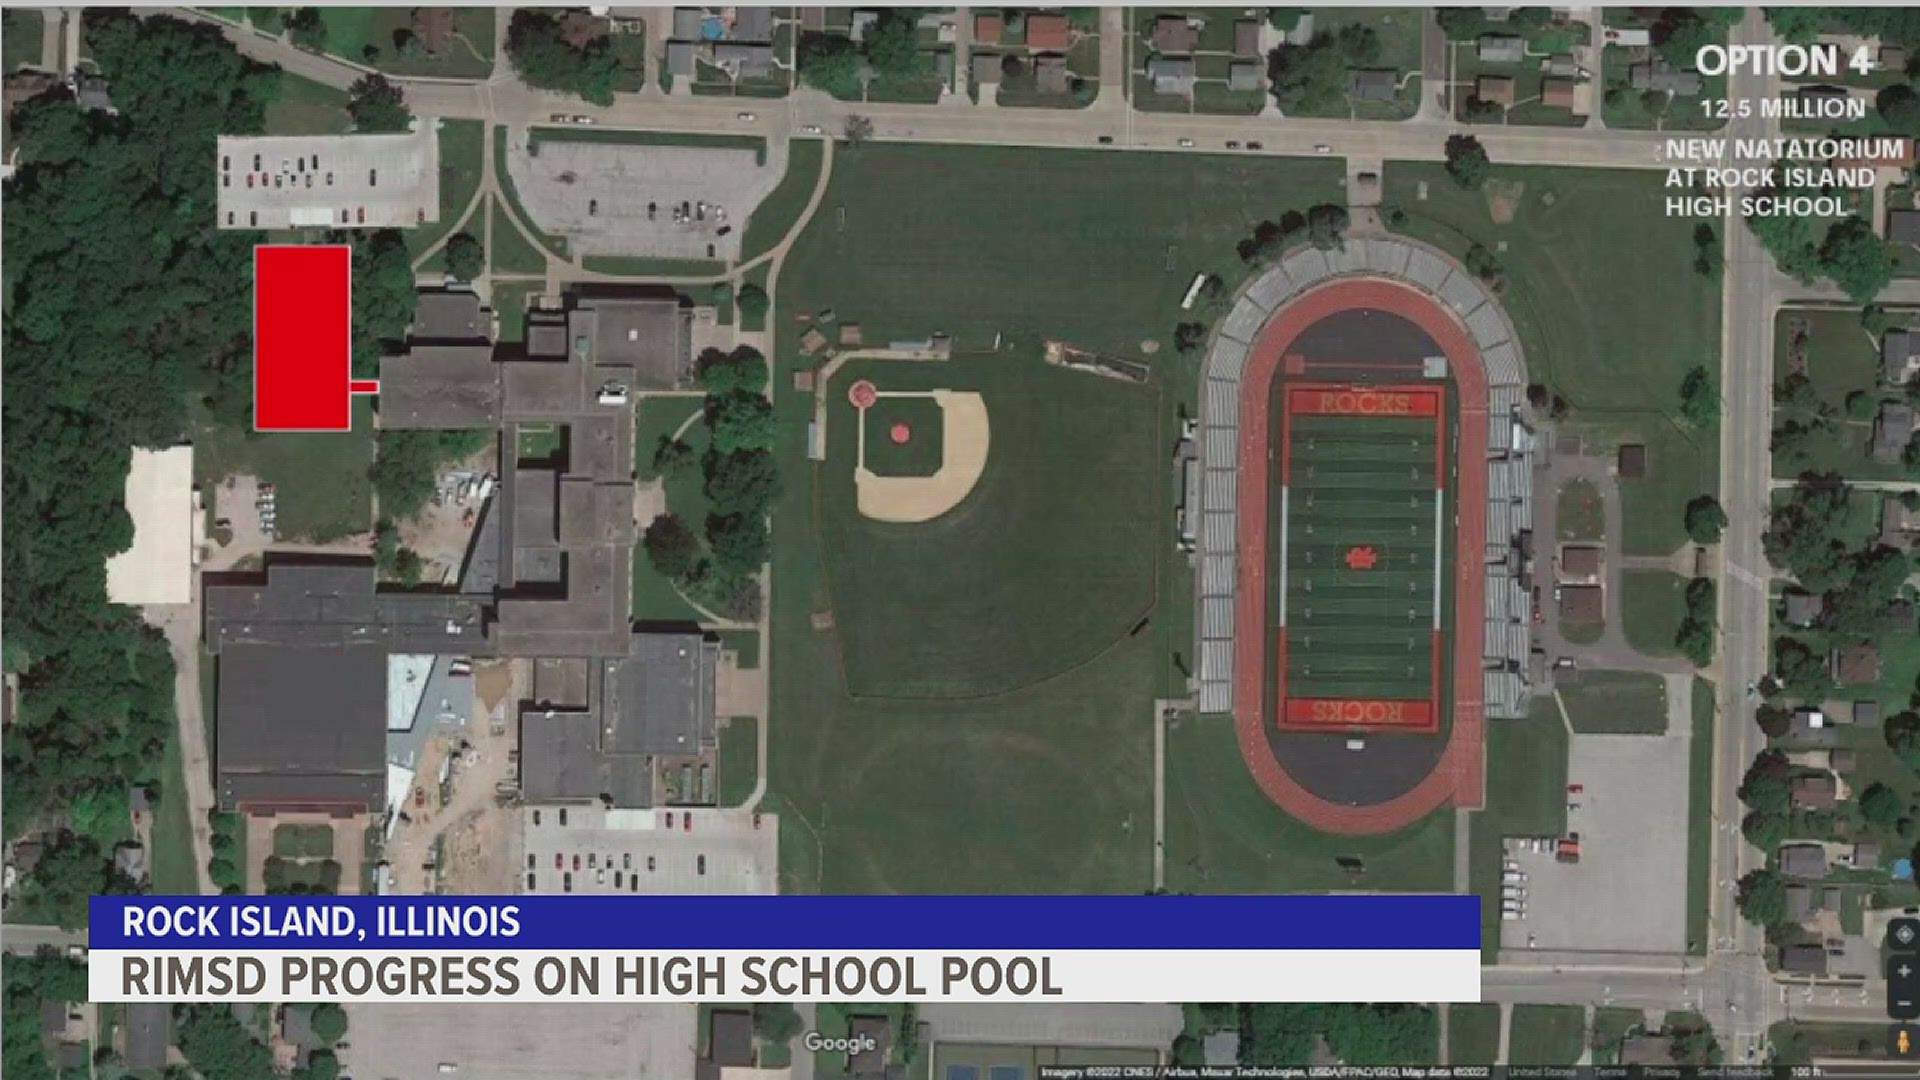 The Rock Island Milan School District board is looking at building a new facility for the pool, which need an additional $10 million in funding.